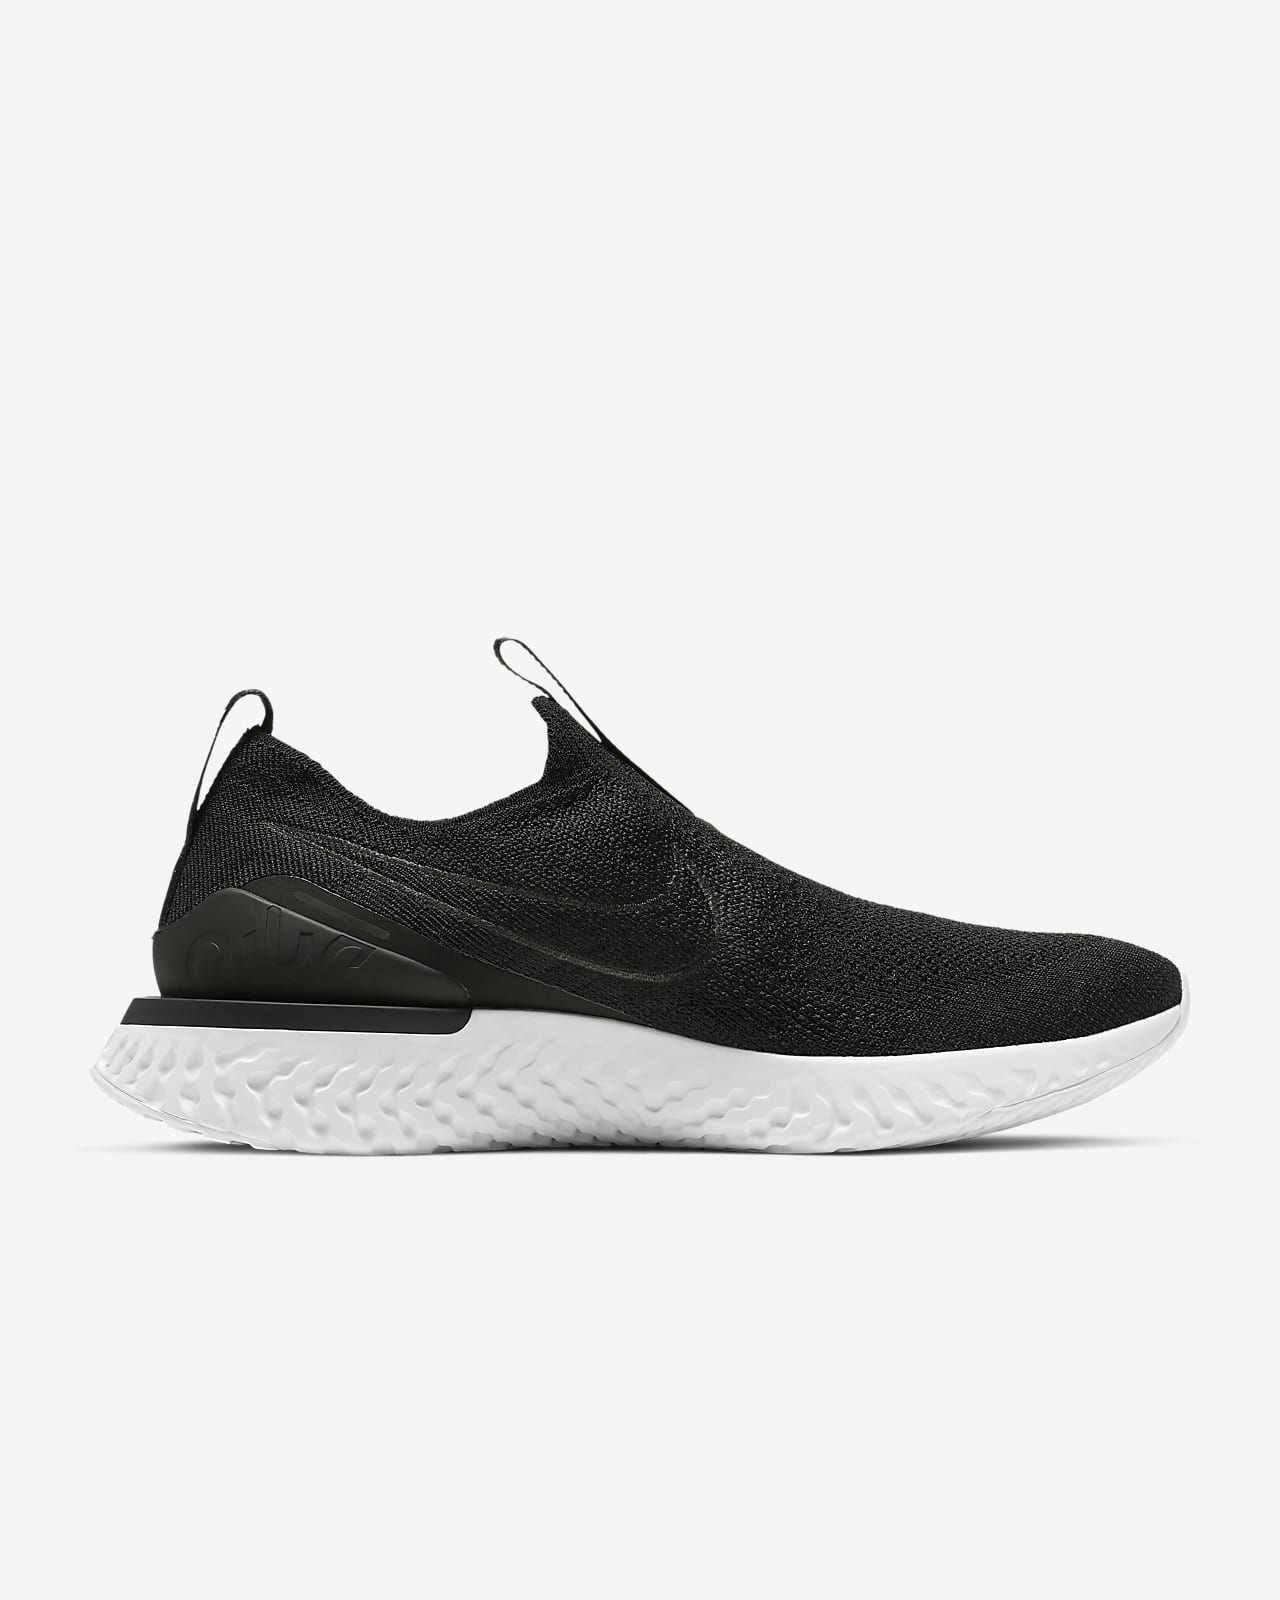 nike slip on shoes womens philippines